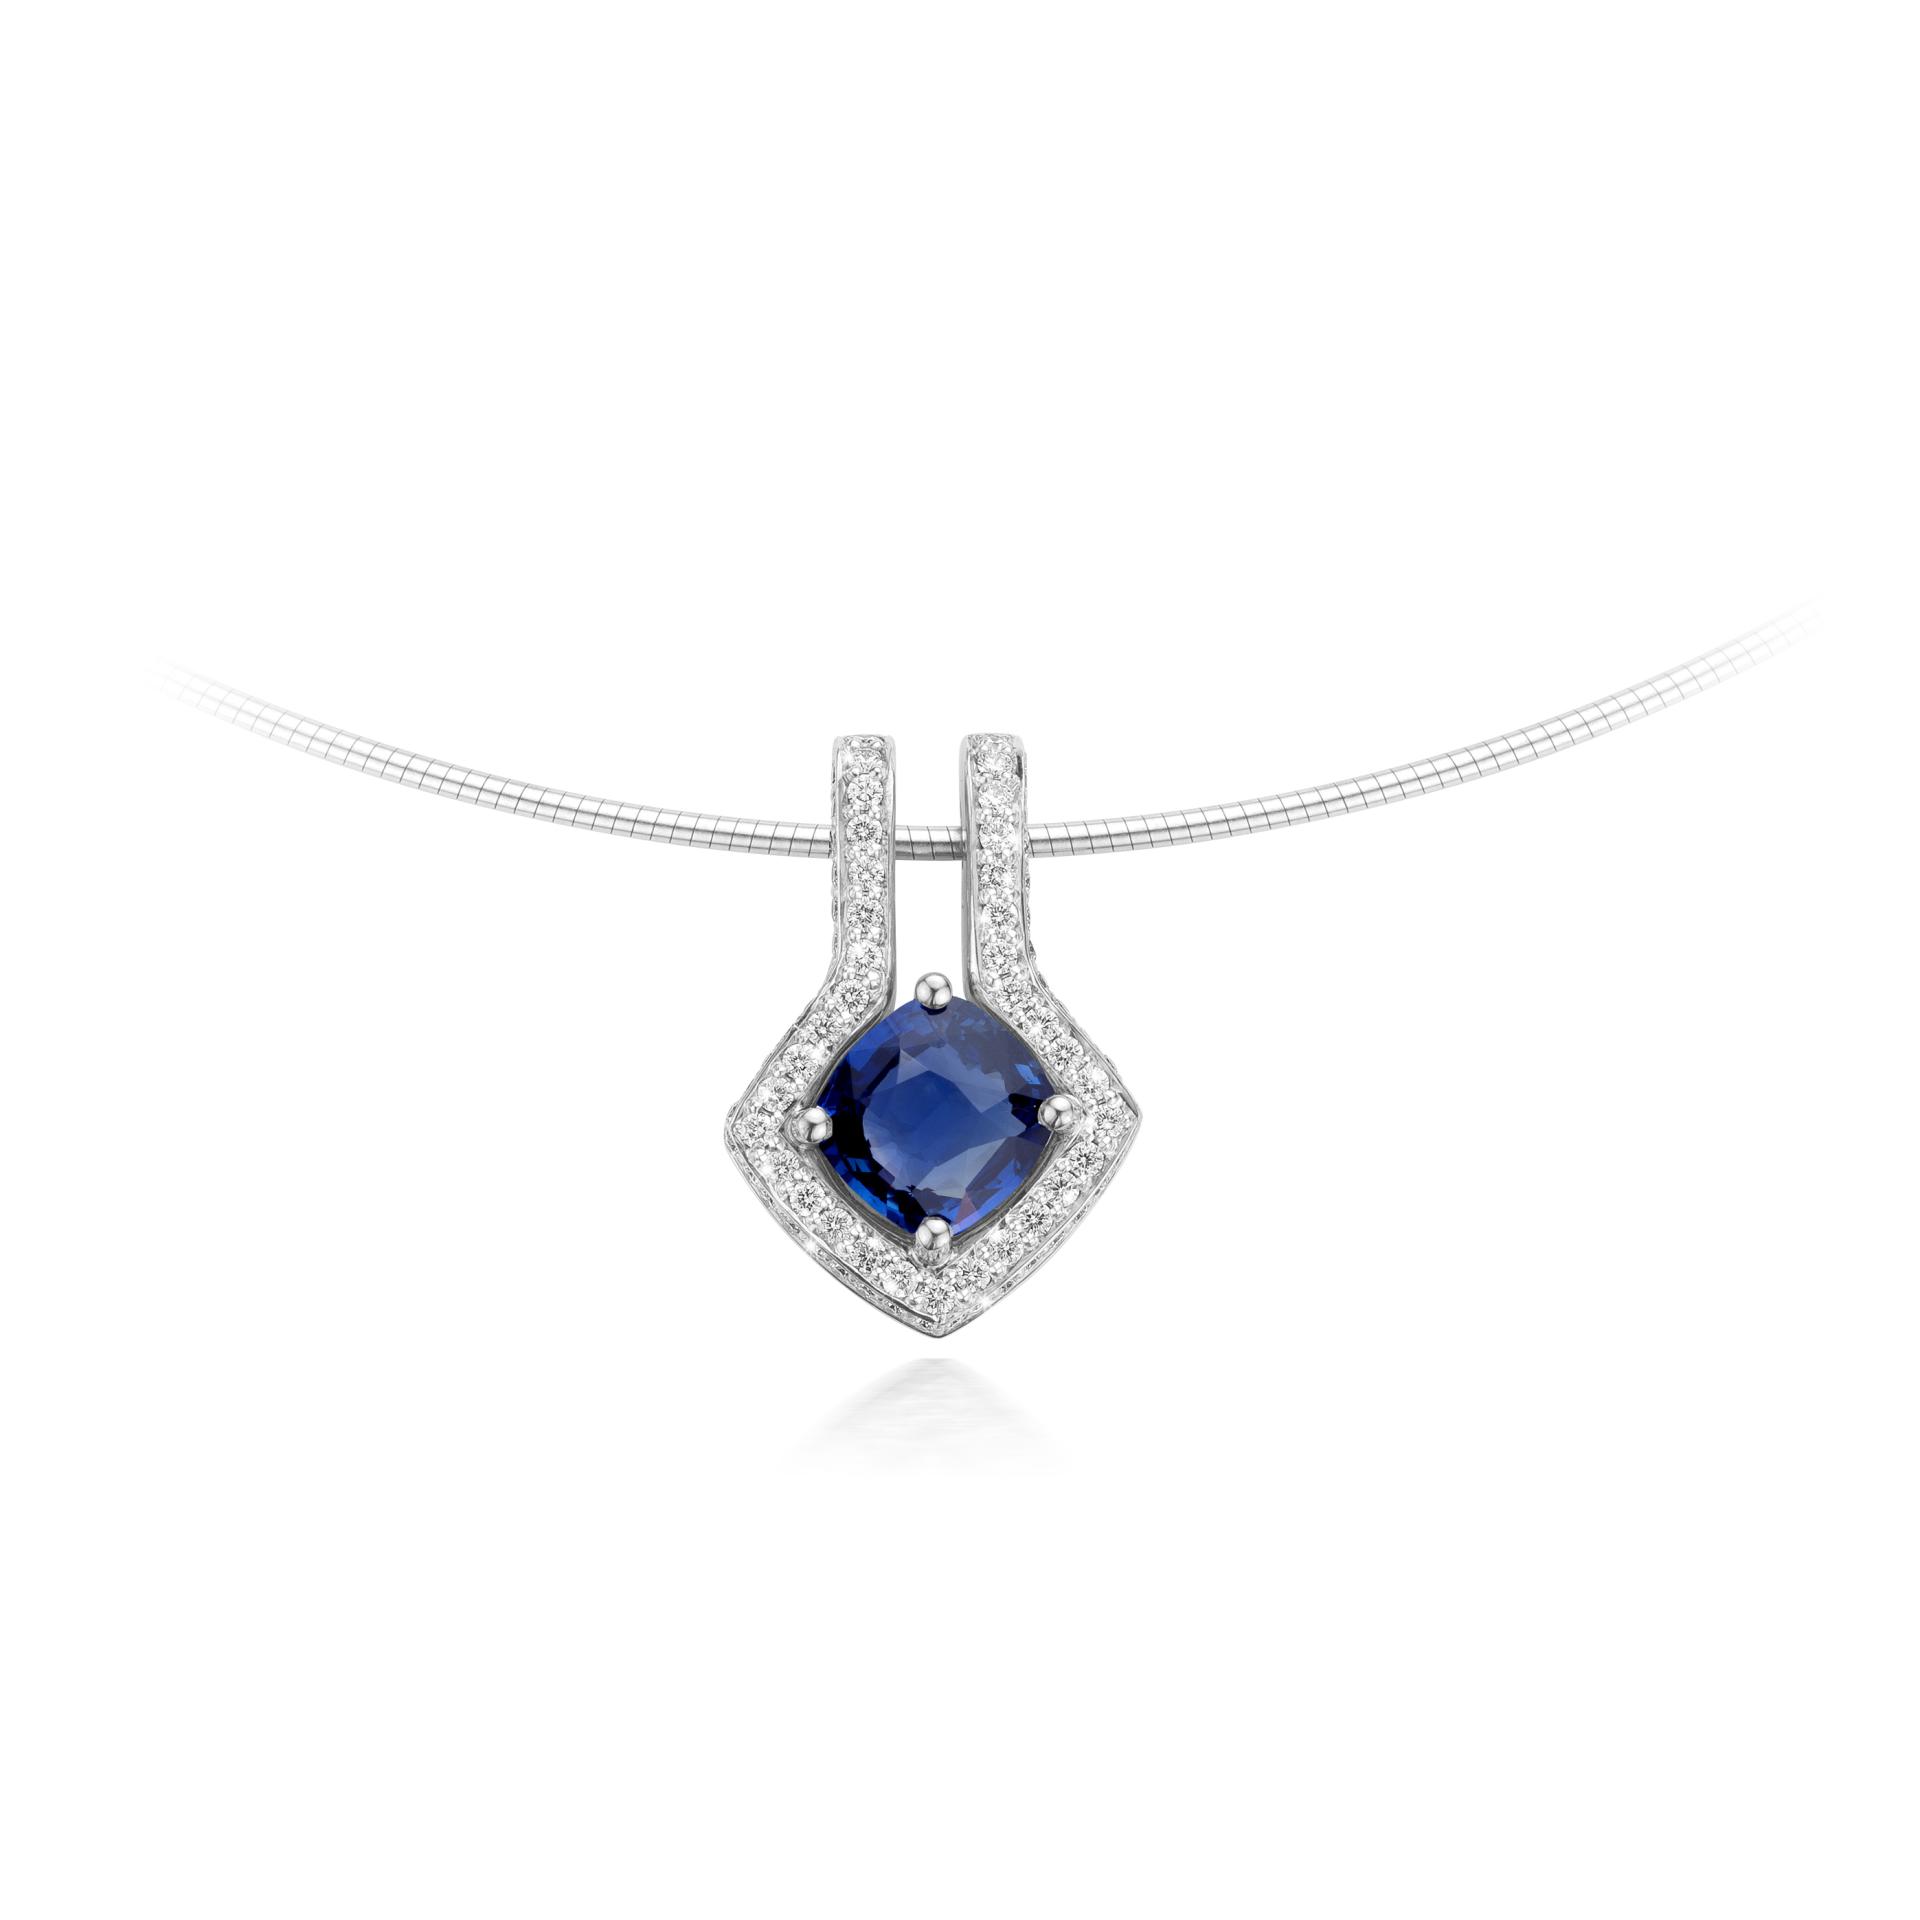 White gold pendant set with blue sapphire and brilliant cut diamonds made by Maison De Greef